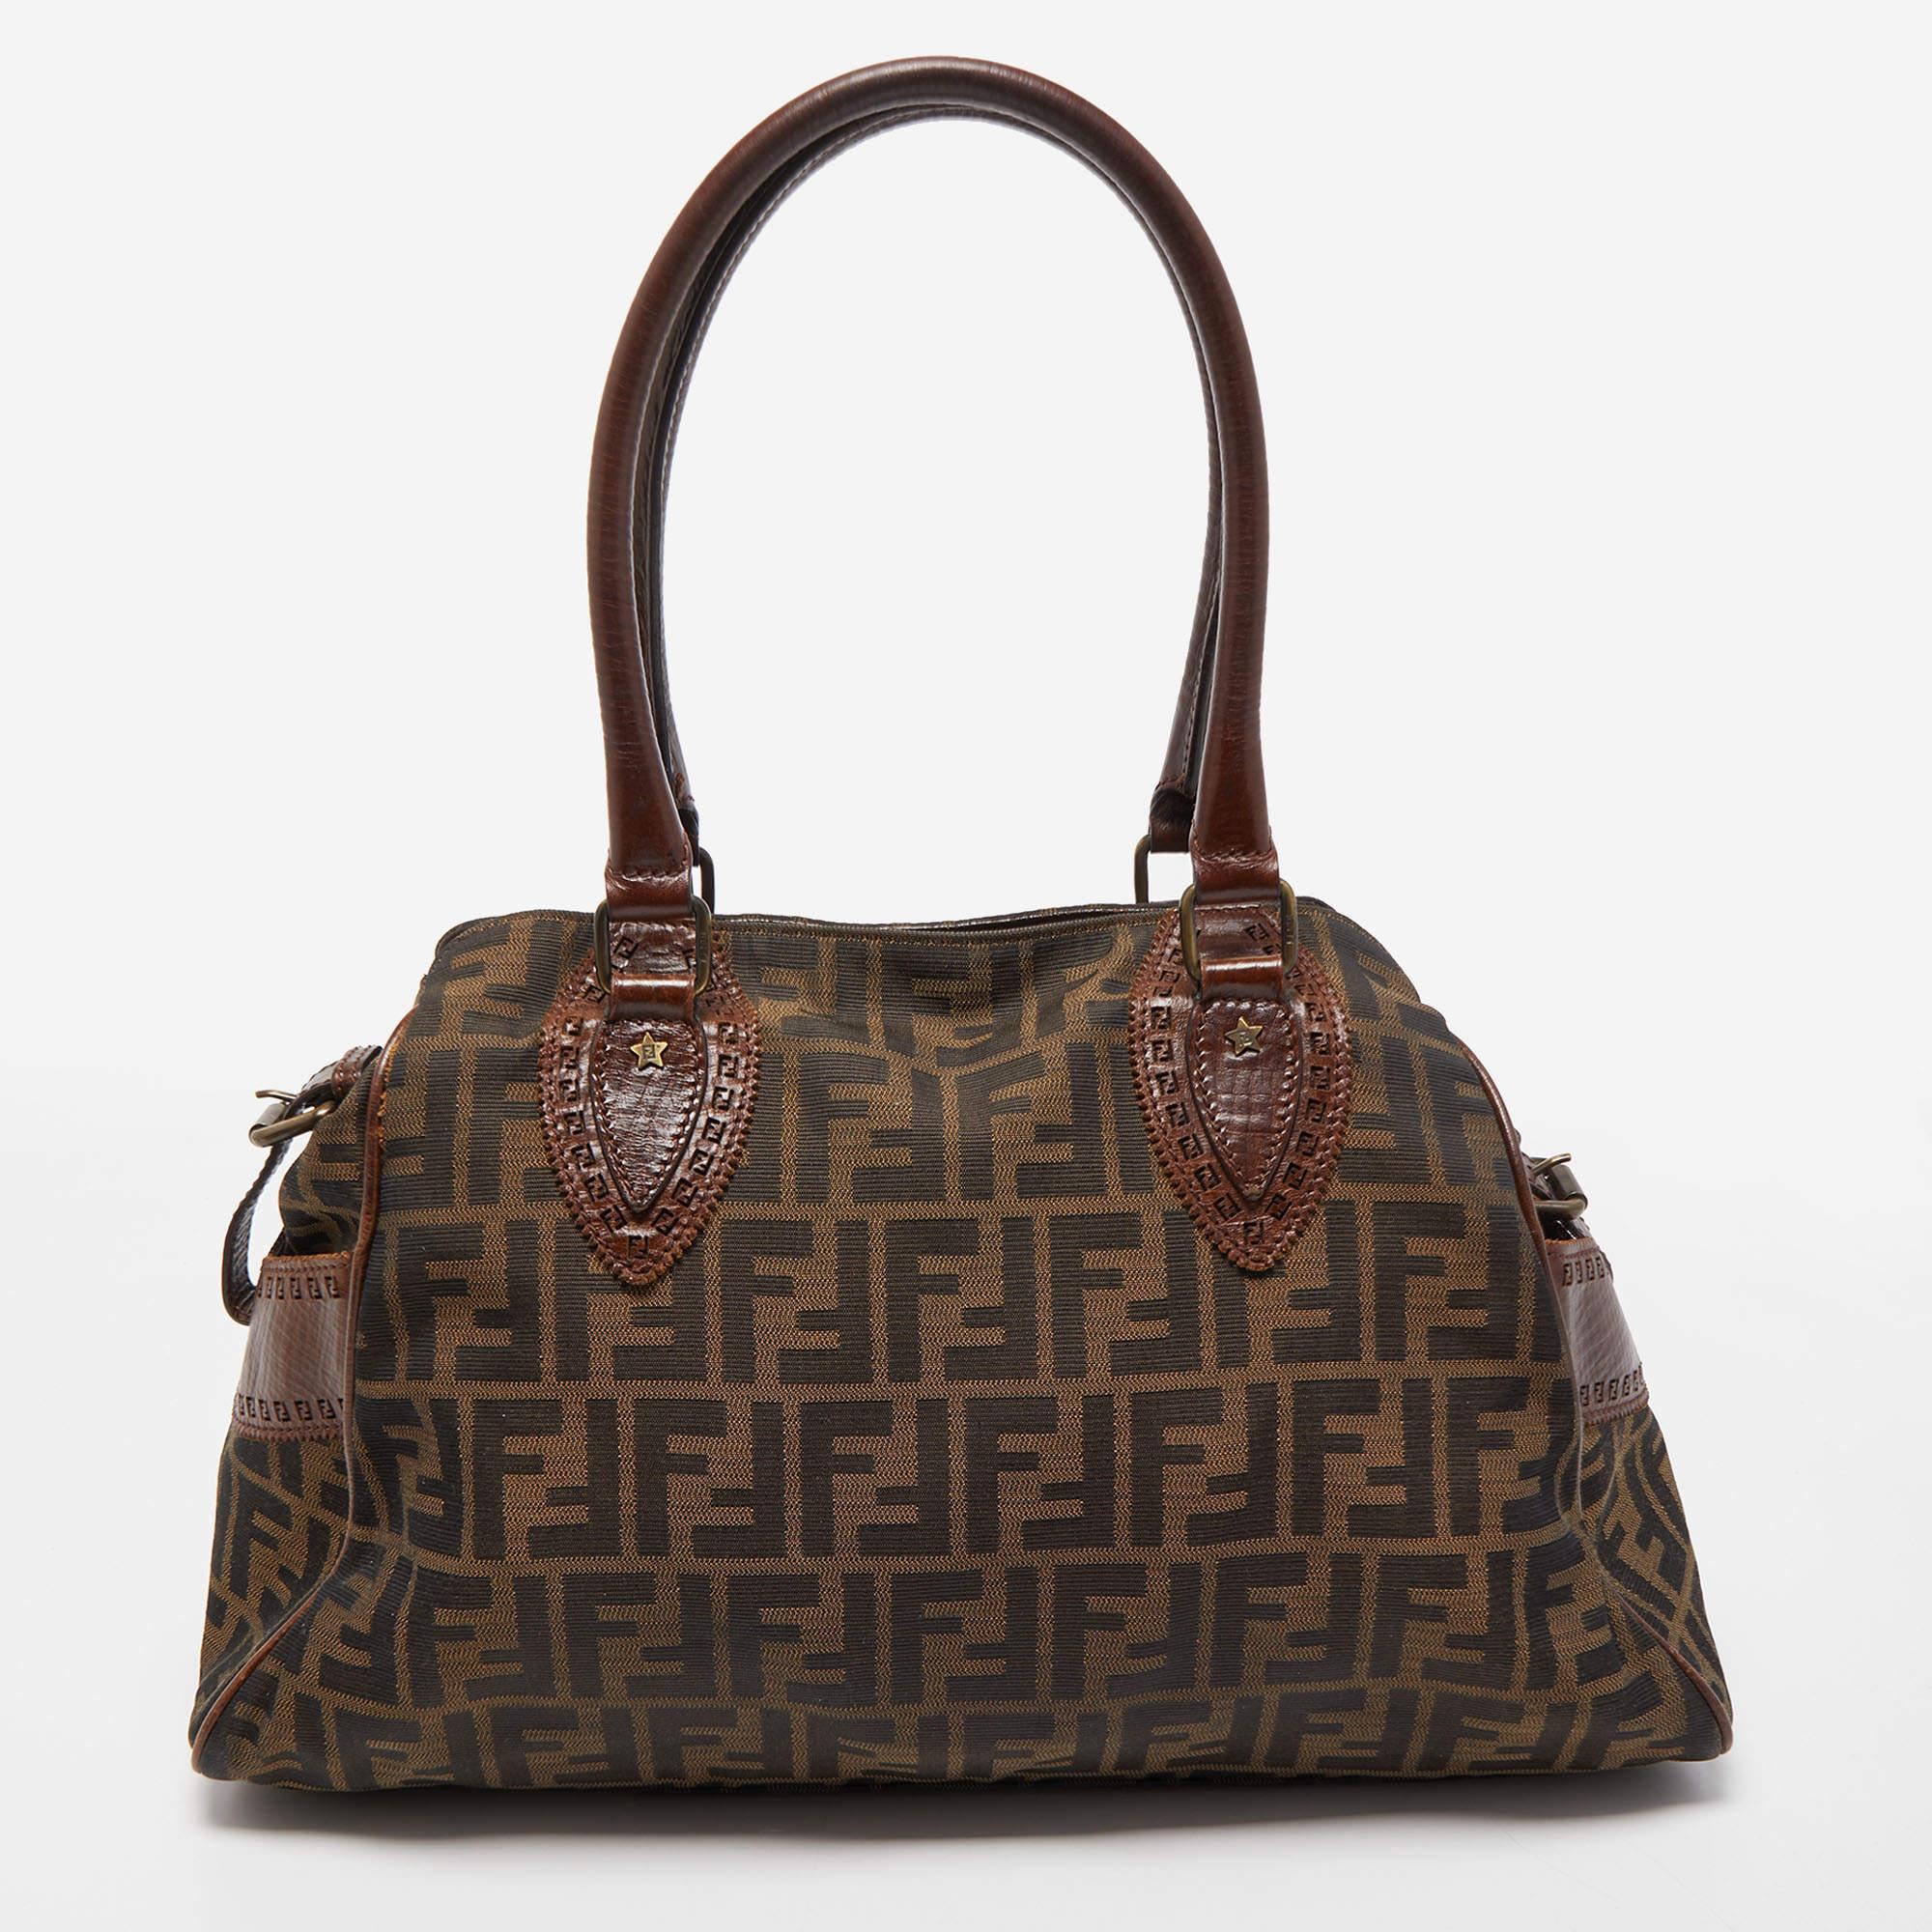 Adorned with brass-tone accents, this Fendi Chef De Jour bag will list as one of your favorites. Made from tobacco Zucca canvas, it features dual handles at the top, and a spacious fabric-lined interior. The brand signature at the front offers it a